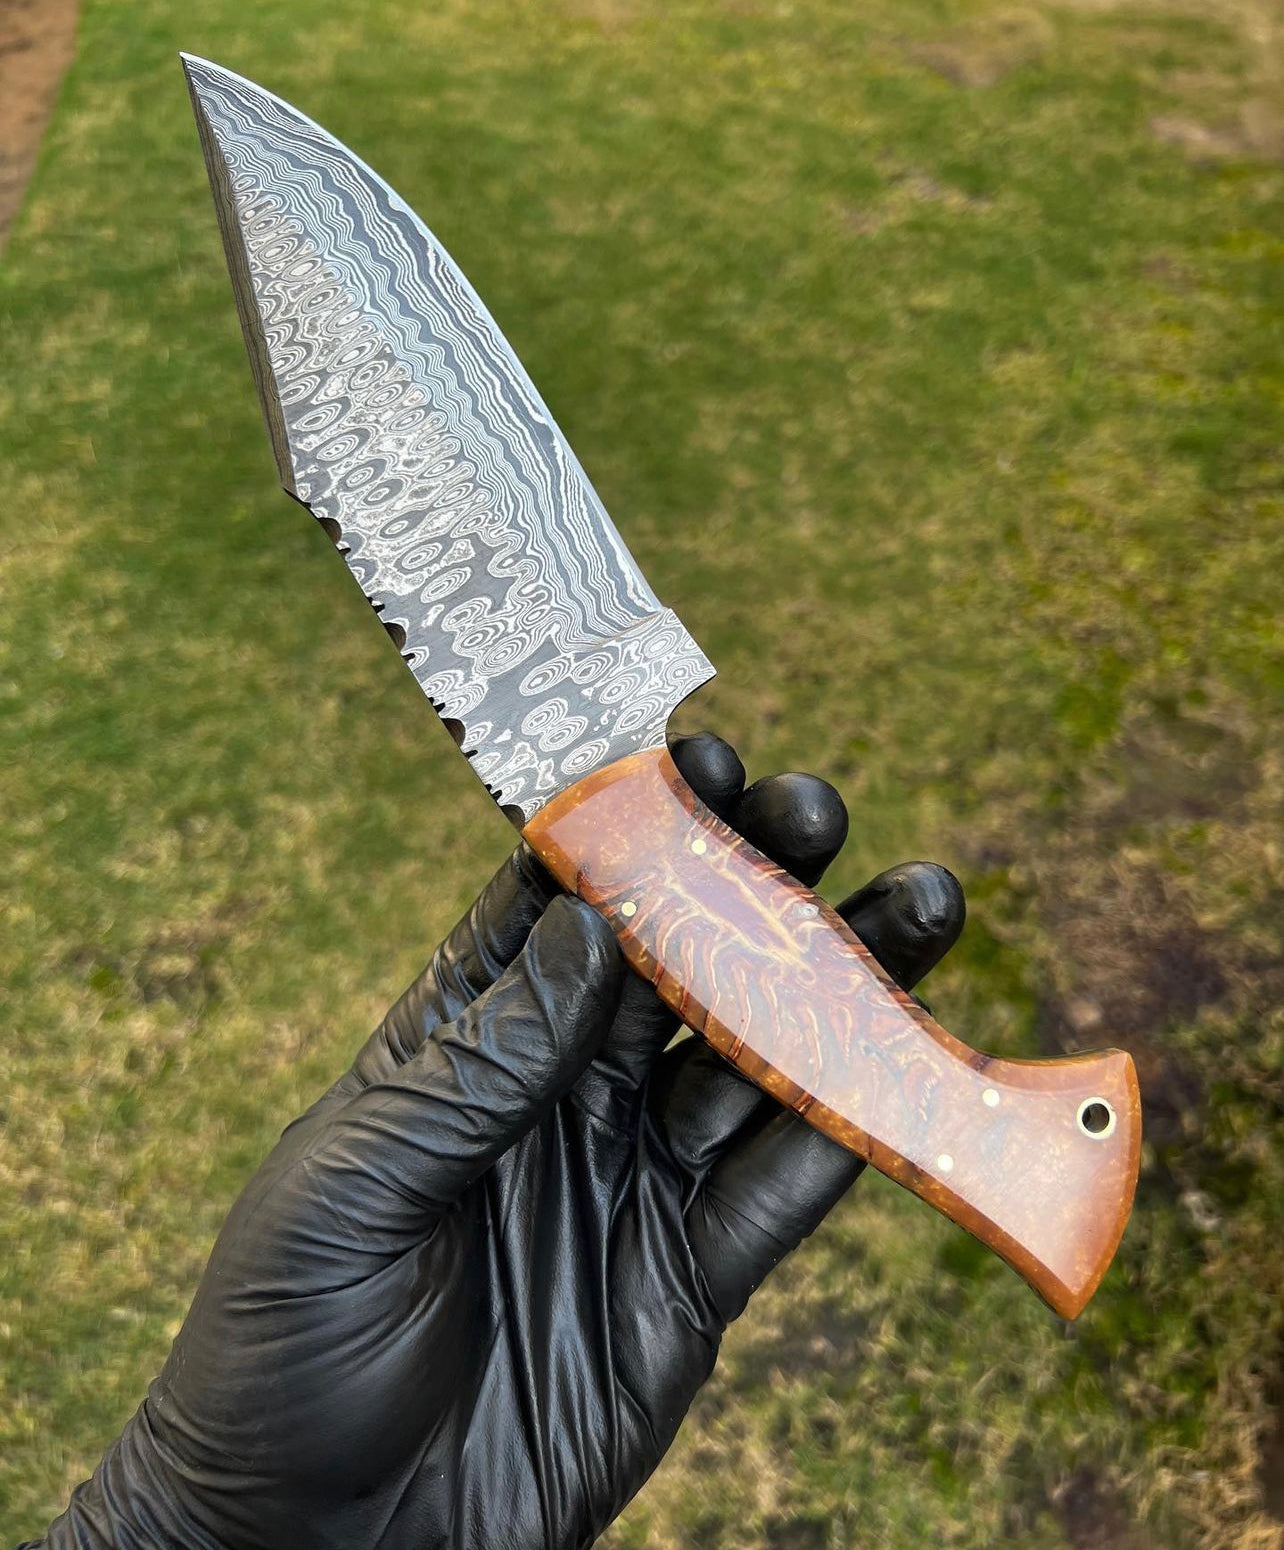 Damascus Steel Classic Outdoor Camping knife